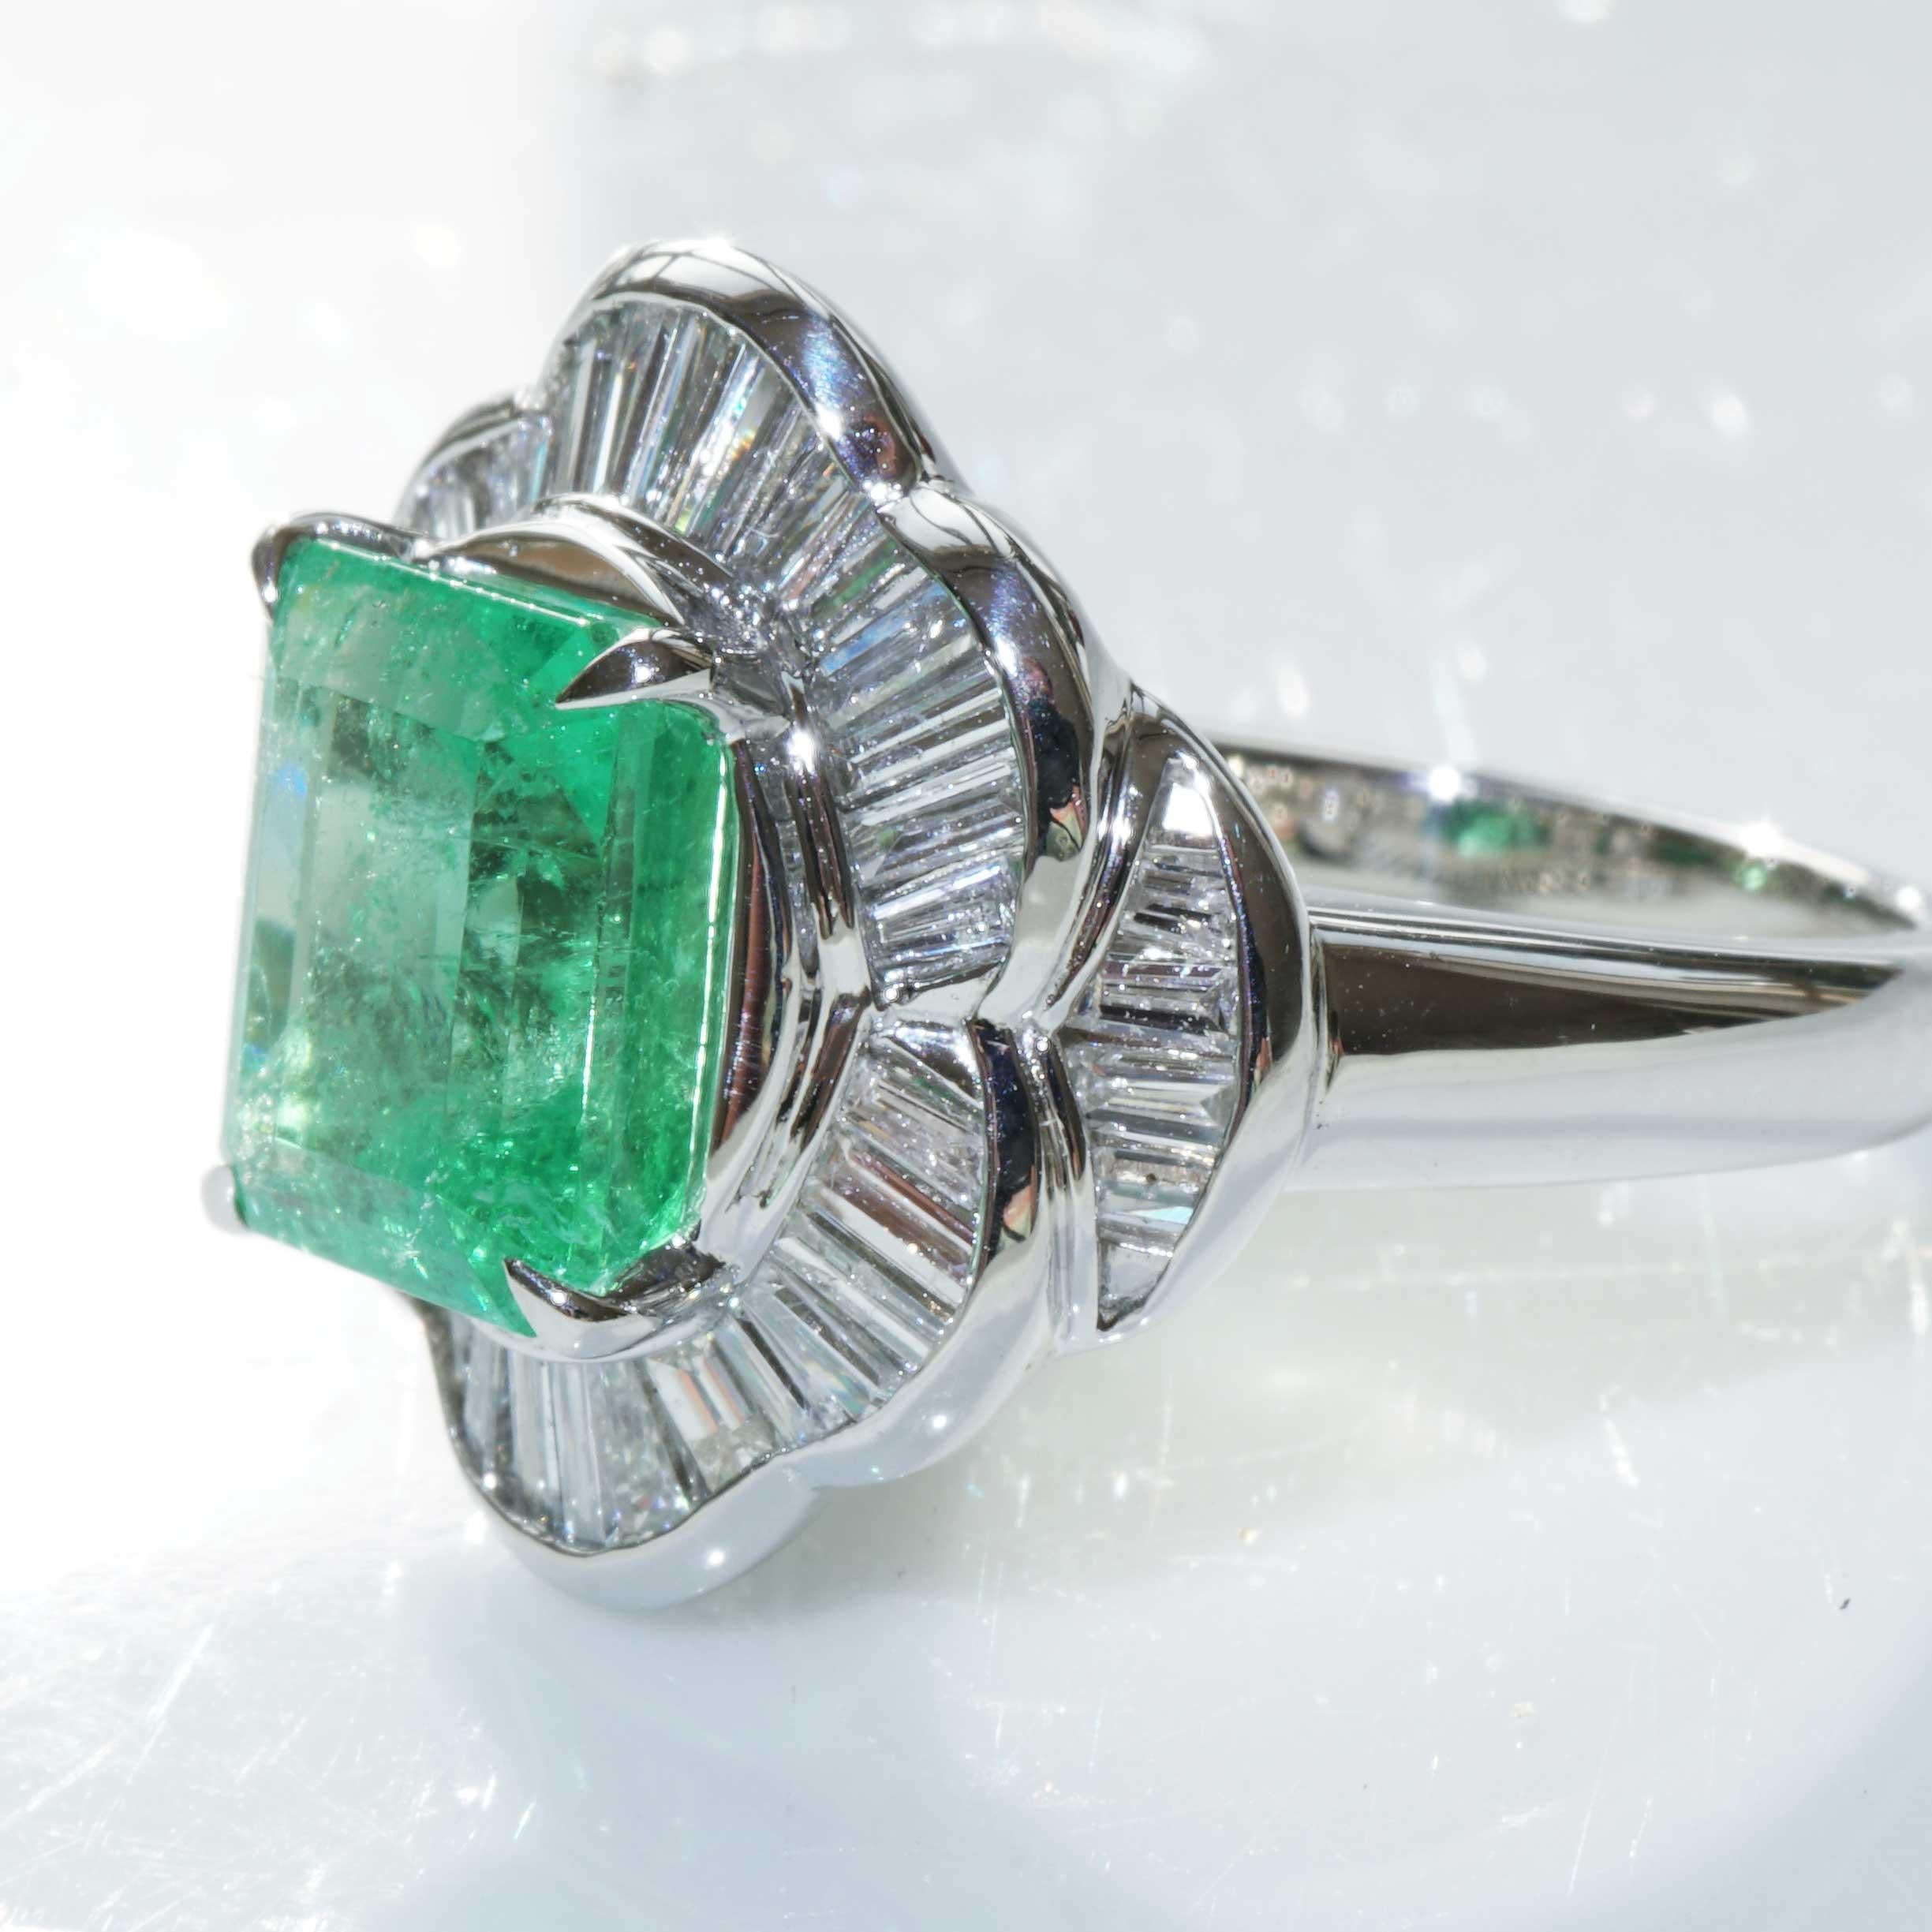 Emerald Cut Columbian Emerald Diamond Ring Platinum 3.11 ct 0.85 ct a Gem of the Top Leage For Sale